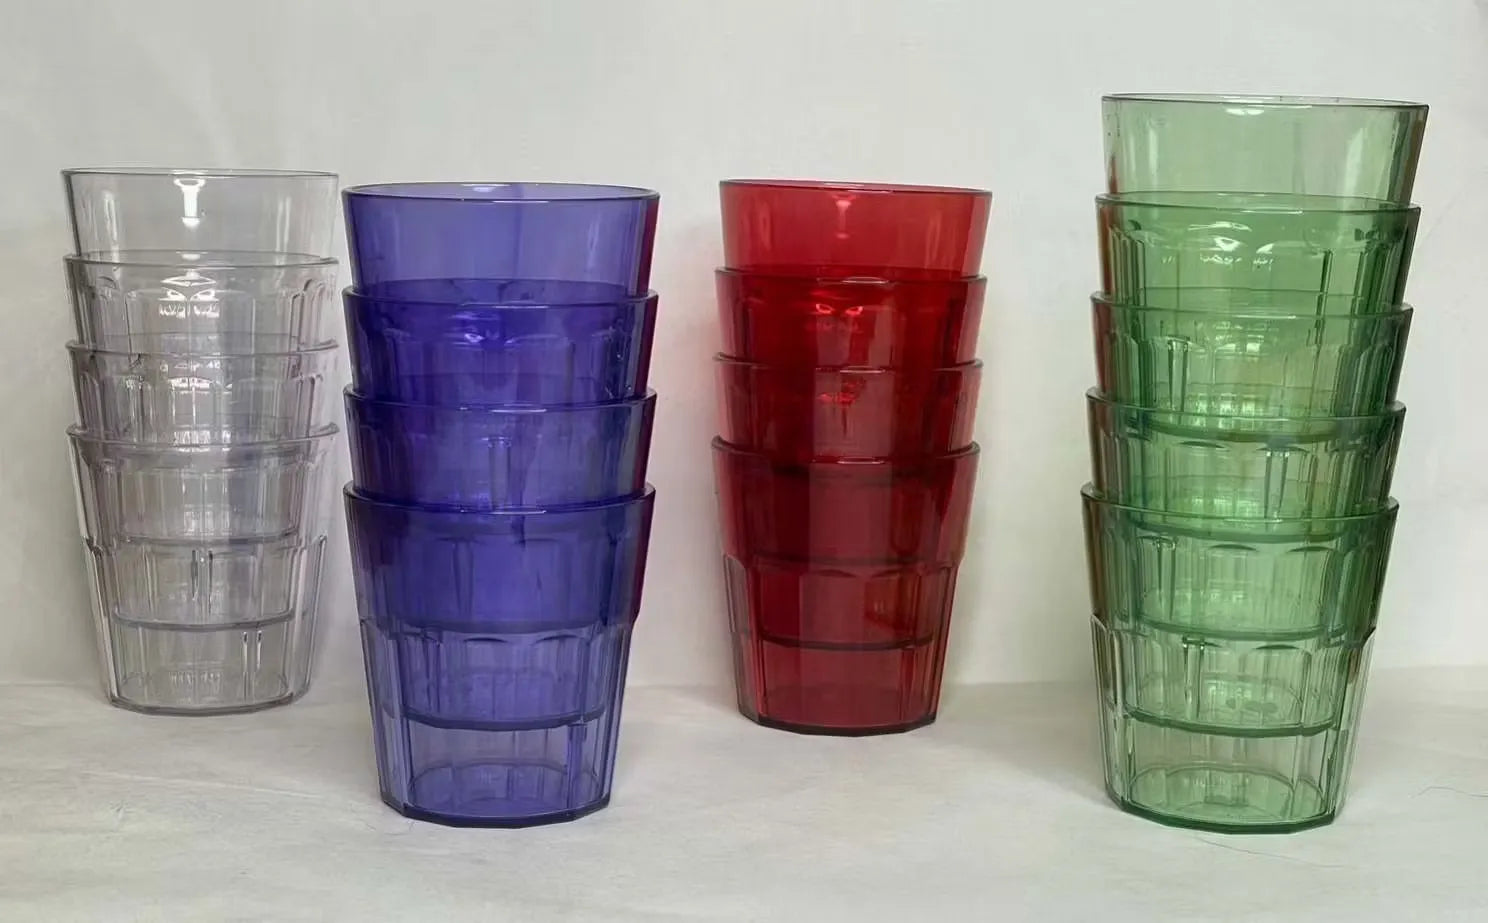 Set of 12 virtually unbreakable, thick drinking cups. Strong and durable cups, perfect for everyday use. Shatterproof cups built to withstand bumps and drops.  Say goodbye to broken glasses with this set of durable, shatterproof cups.